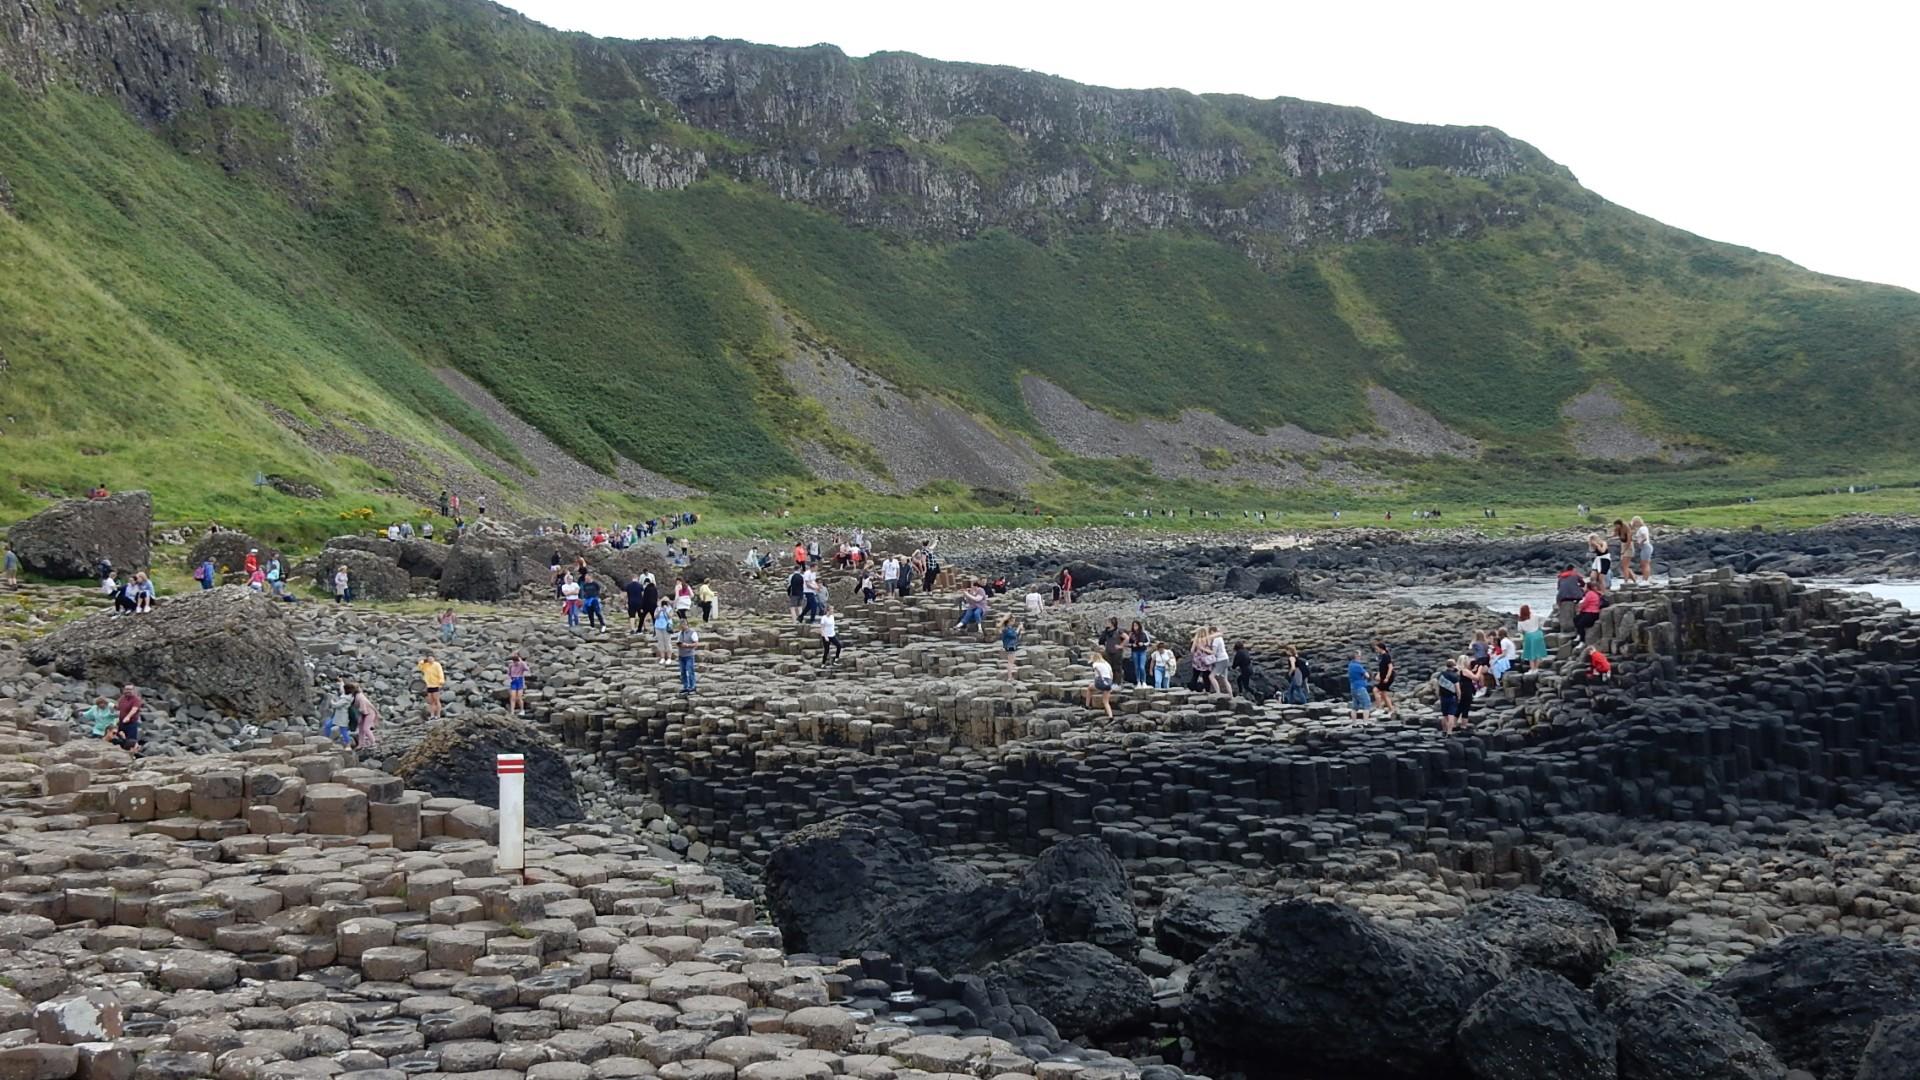 Crowds at the Giant’s Causeway, August 2020